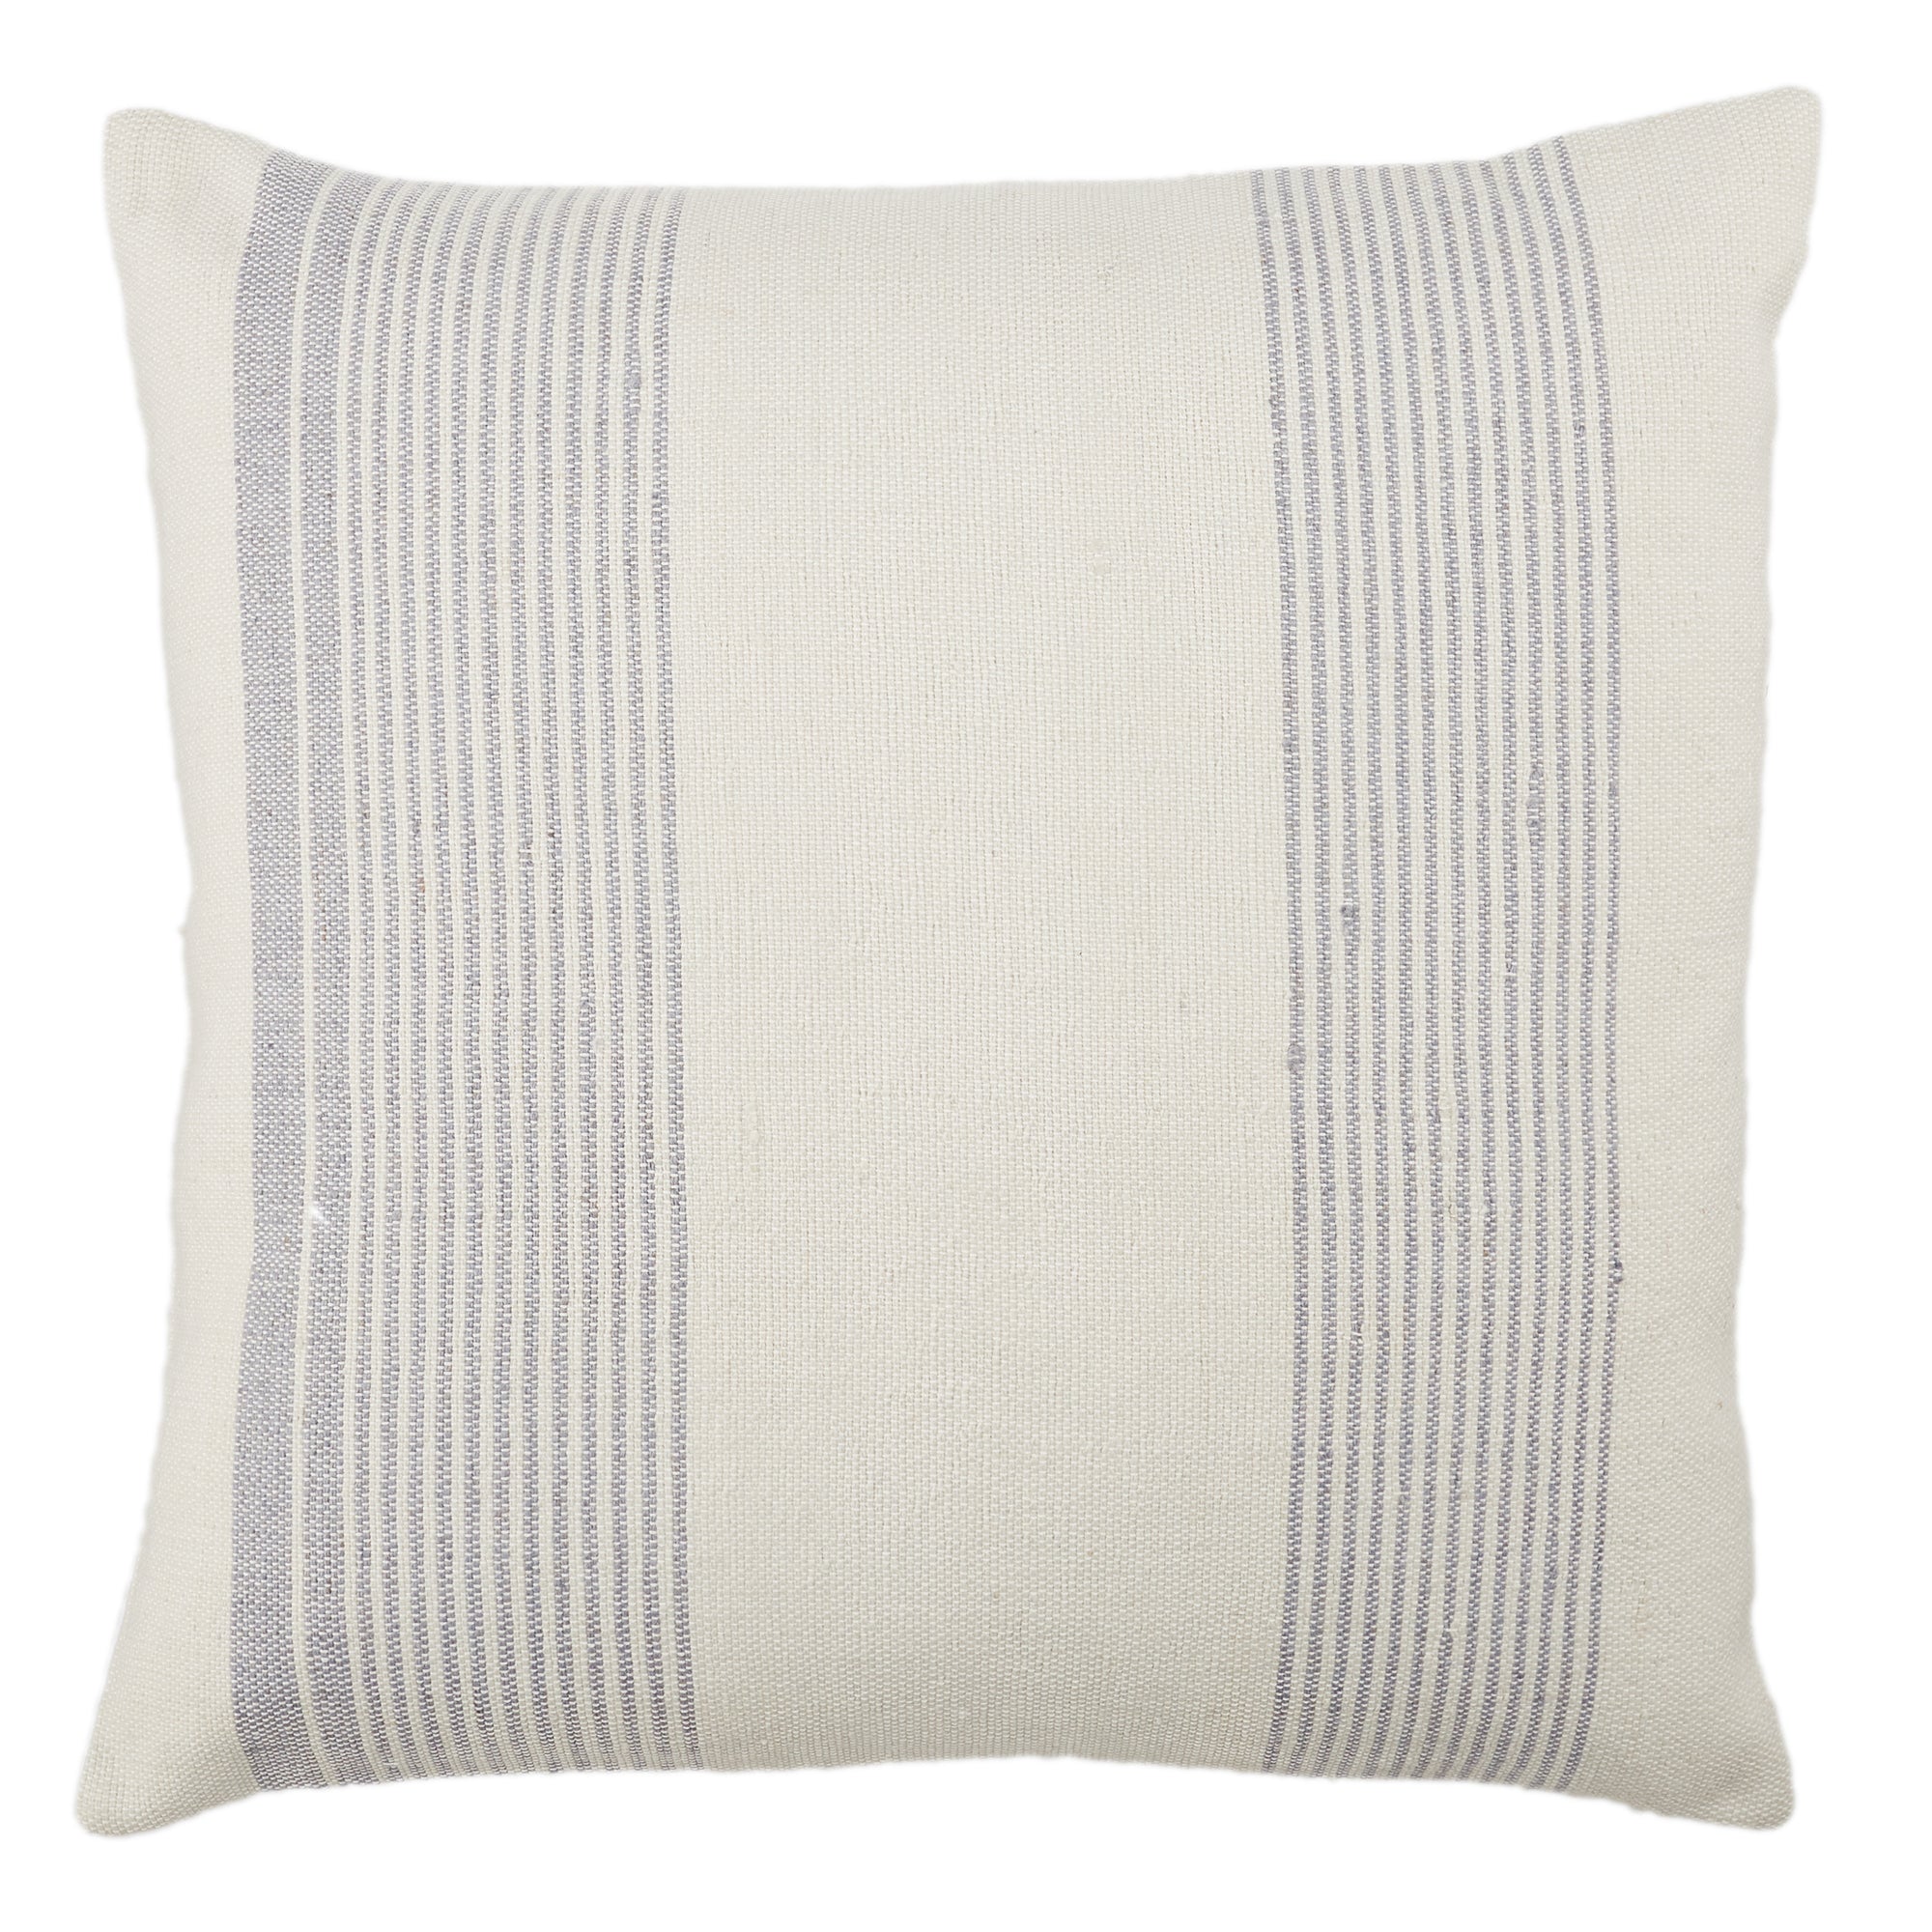 Jaipur Living Parque Outdoor Gray Ivory Striped Poly Fill Pillow